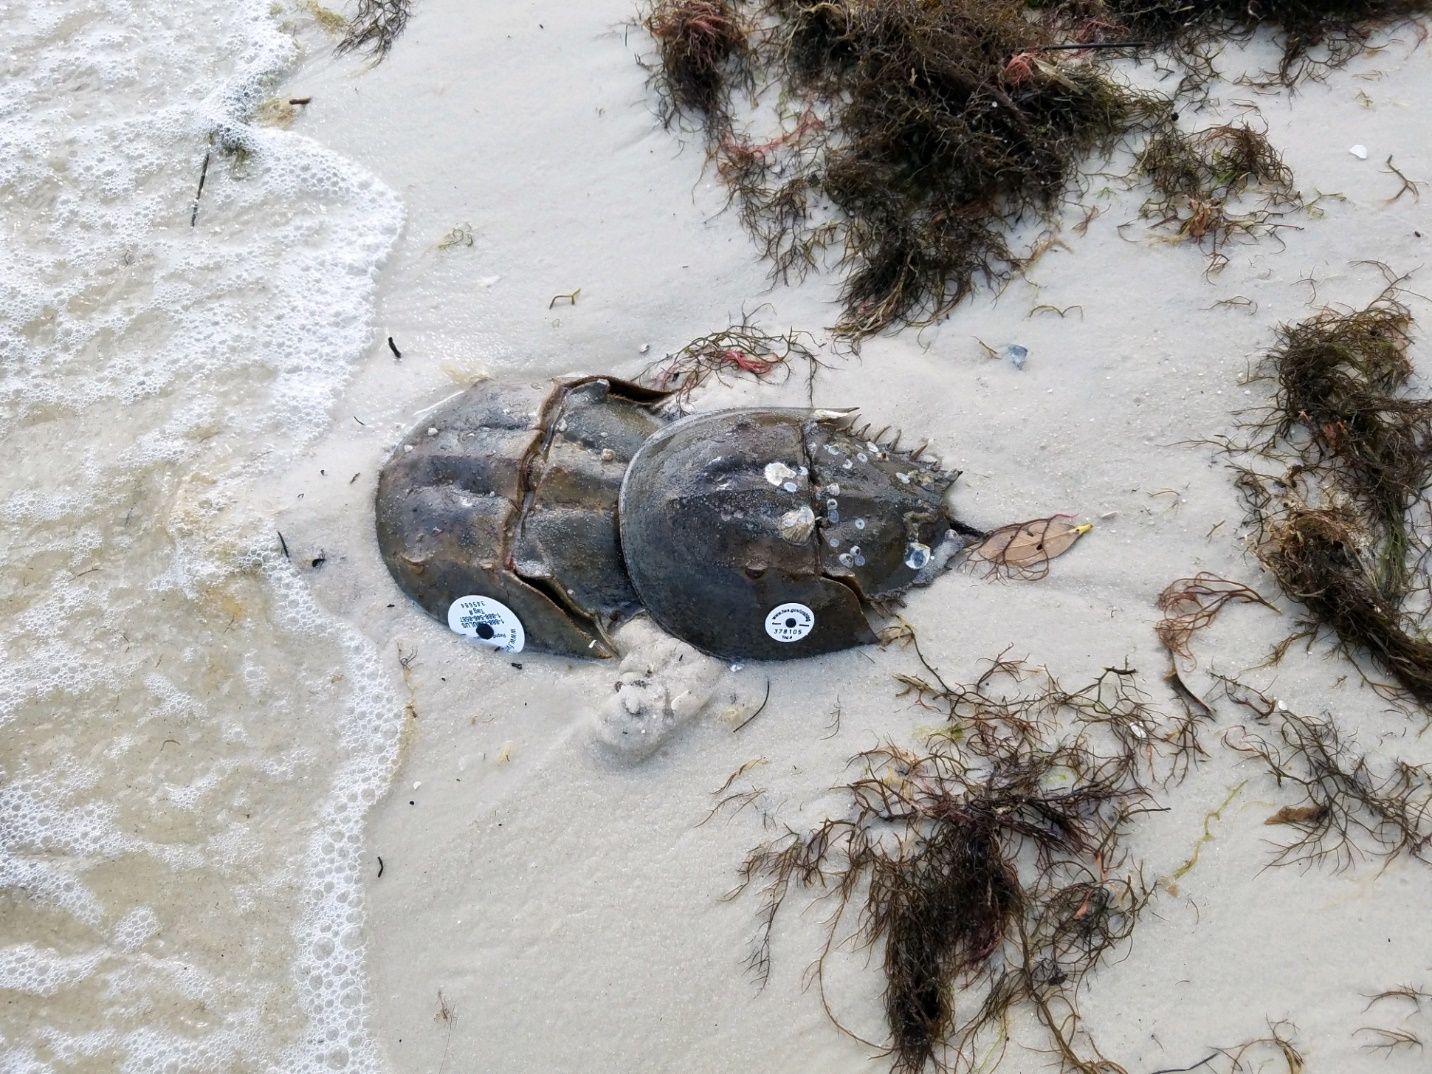 A pair of horseshoe crabs nesting on a beach in Florida during high tide. The male uses its modified claws to attach to the female's shell. Crabs pictured are tagged as part of the Florida Horseshoe Crab Watch tracking program. 